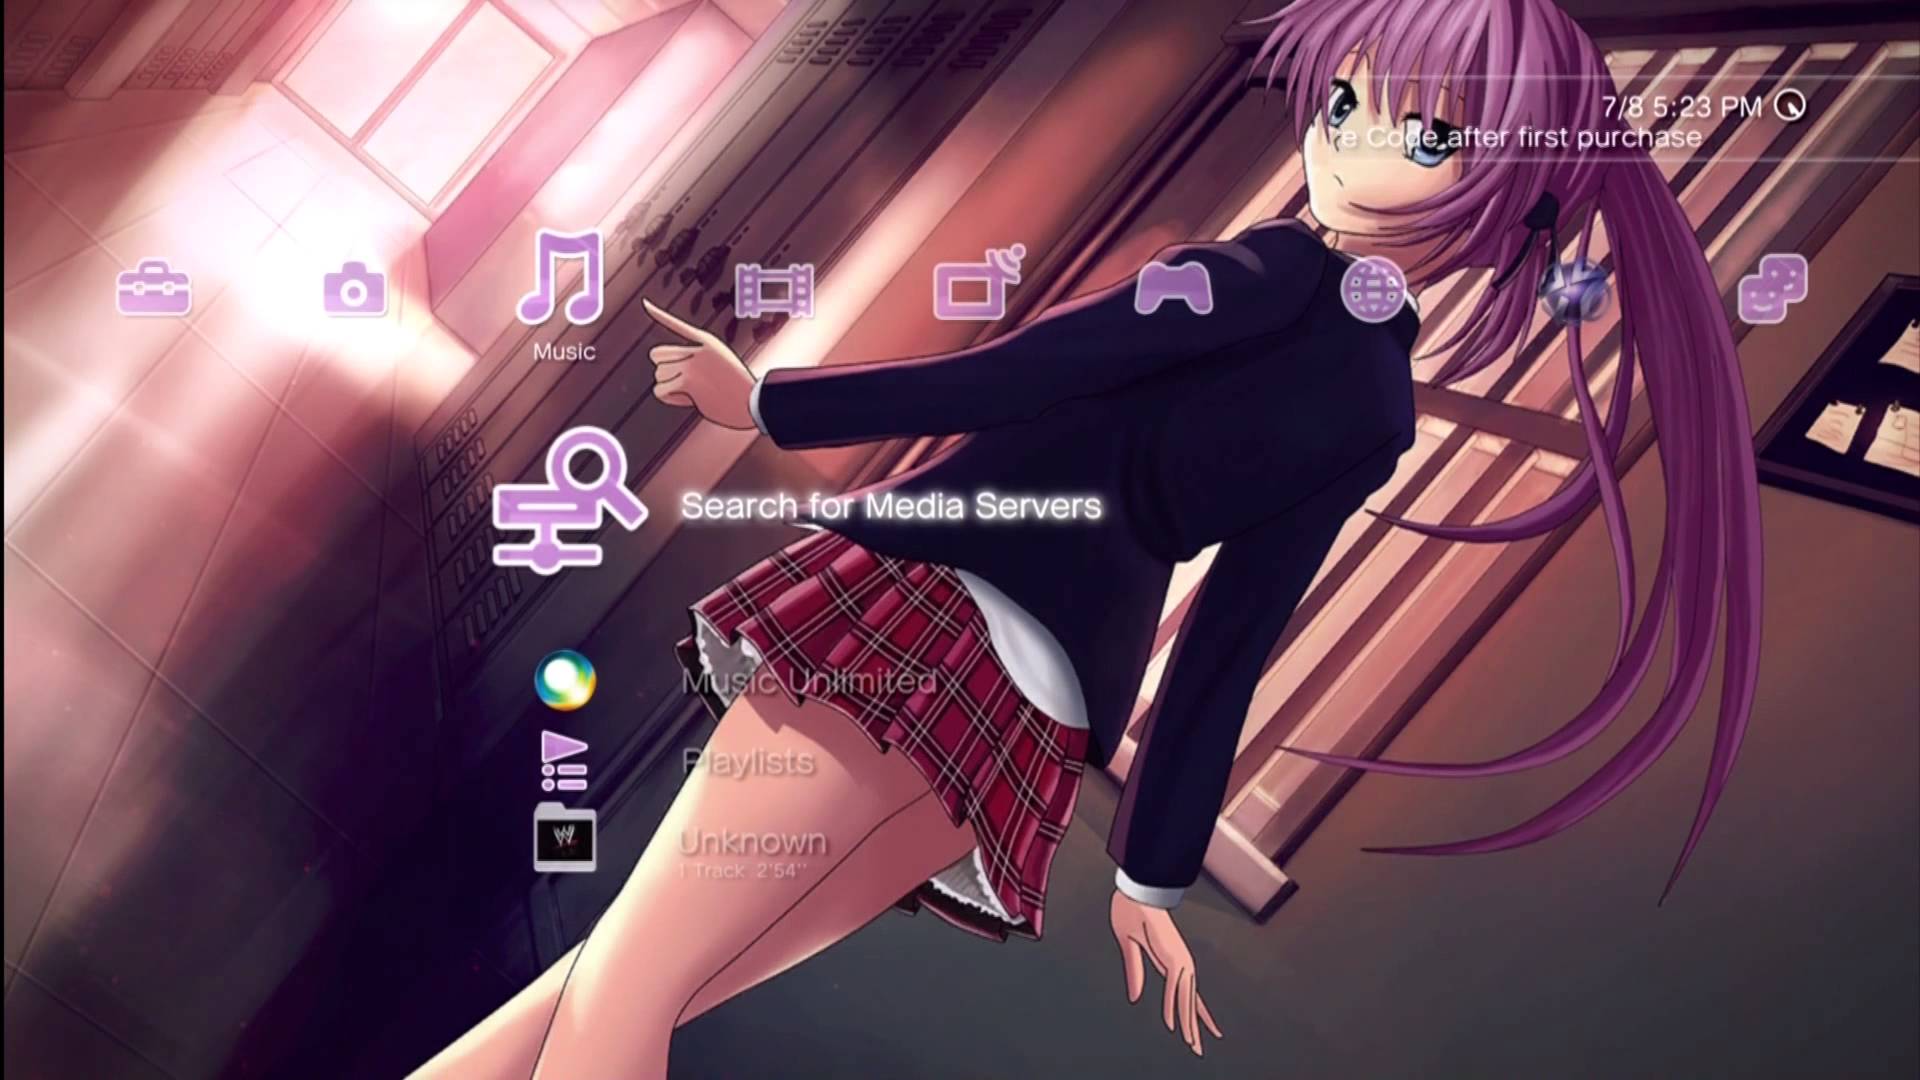 PS3 Dynamic Theme: After Class